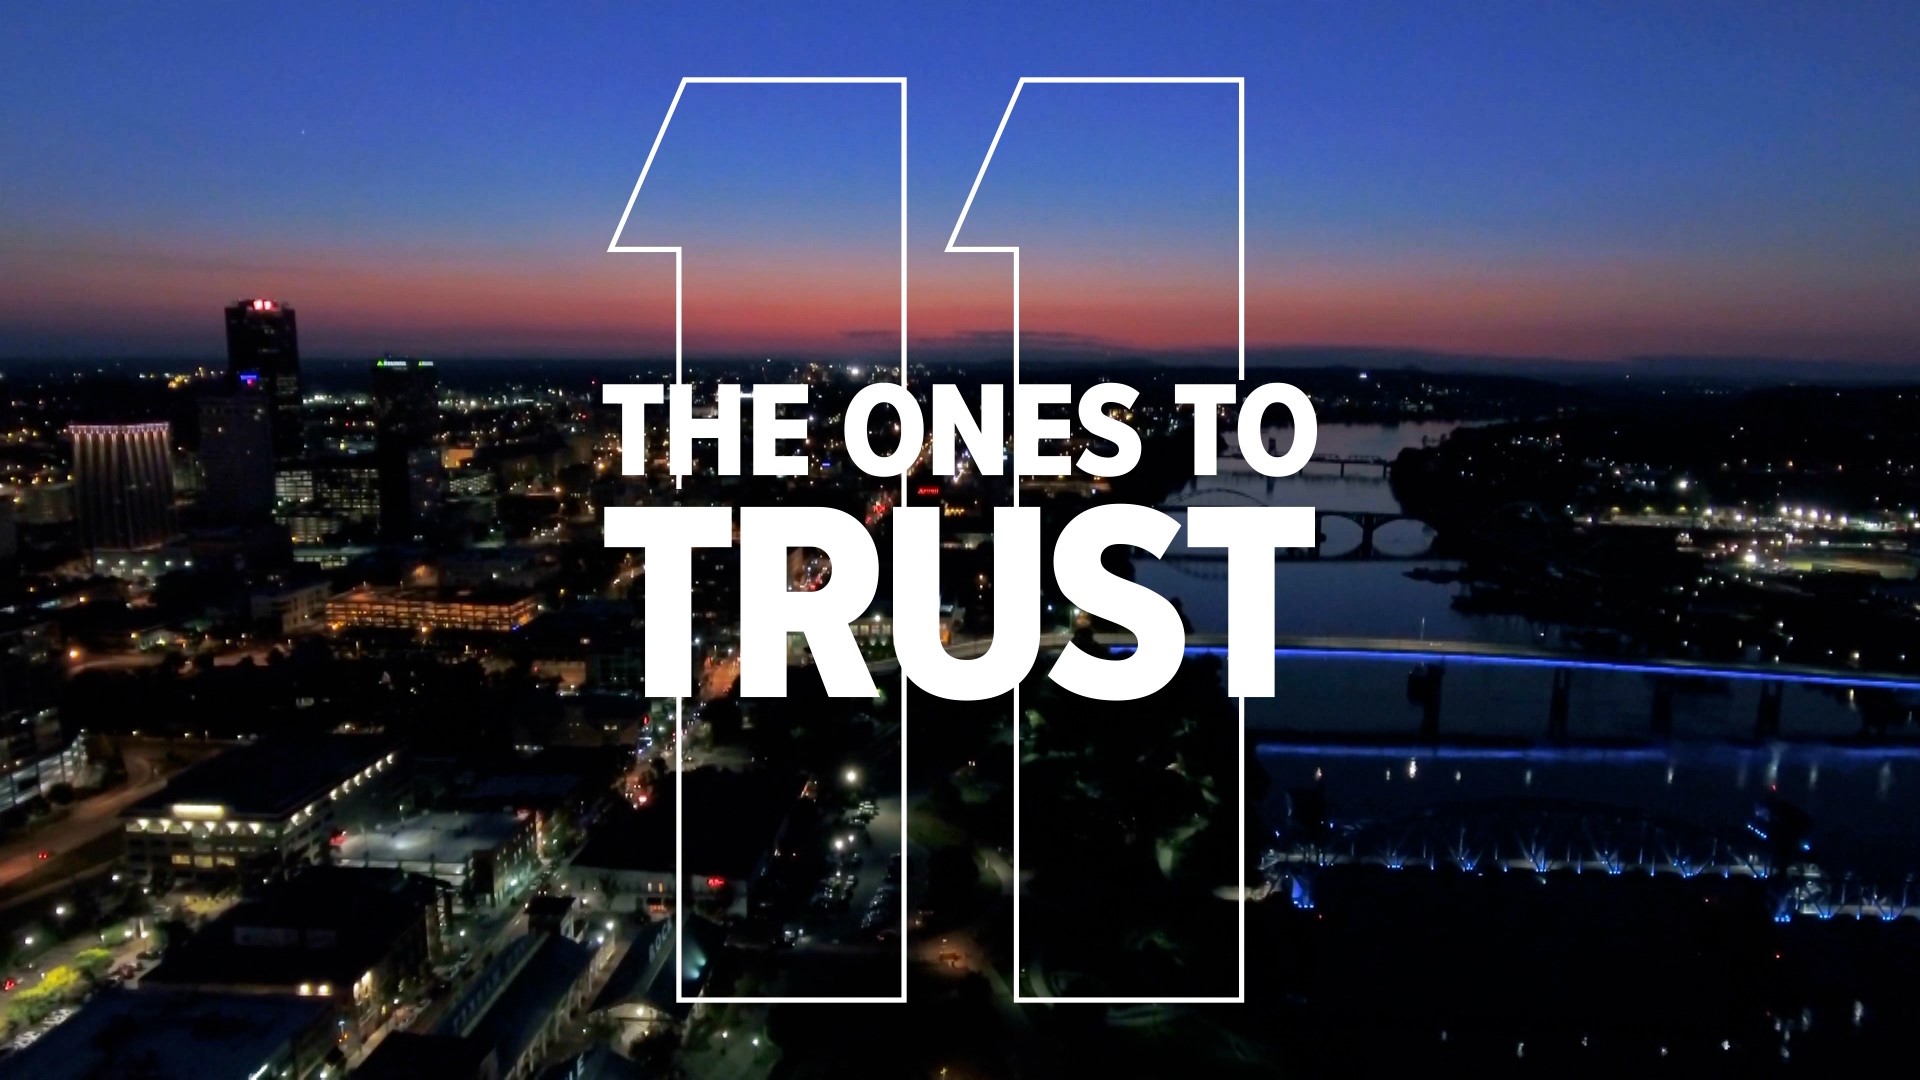 Local news is your connection to what's happening at home and we are still the ones to trust!